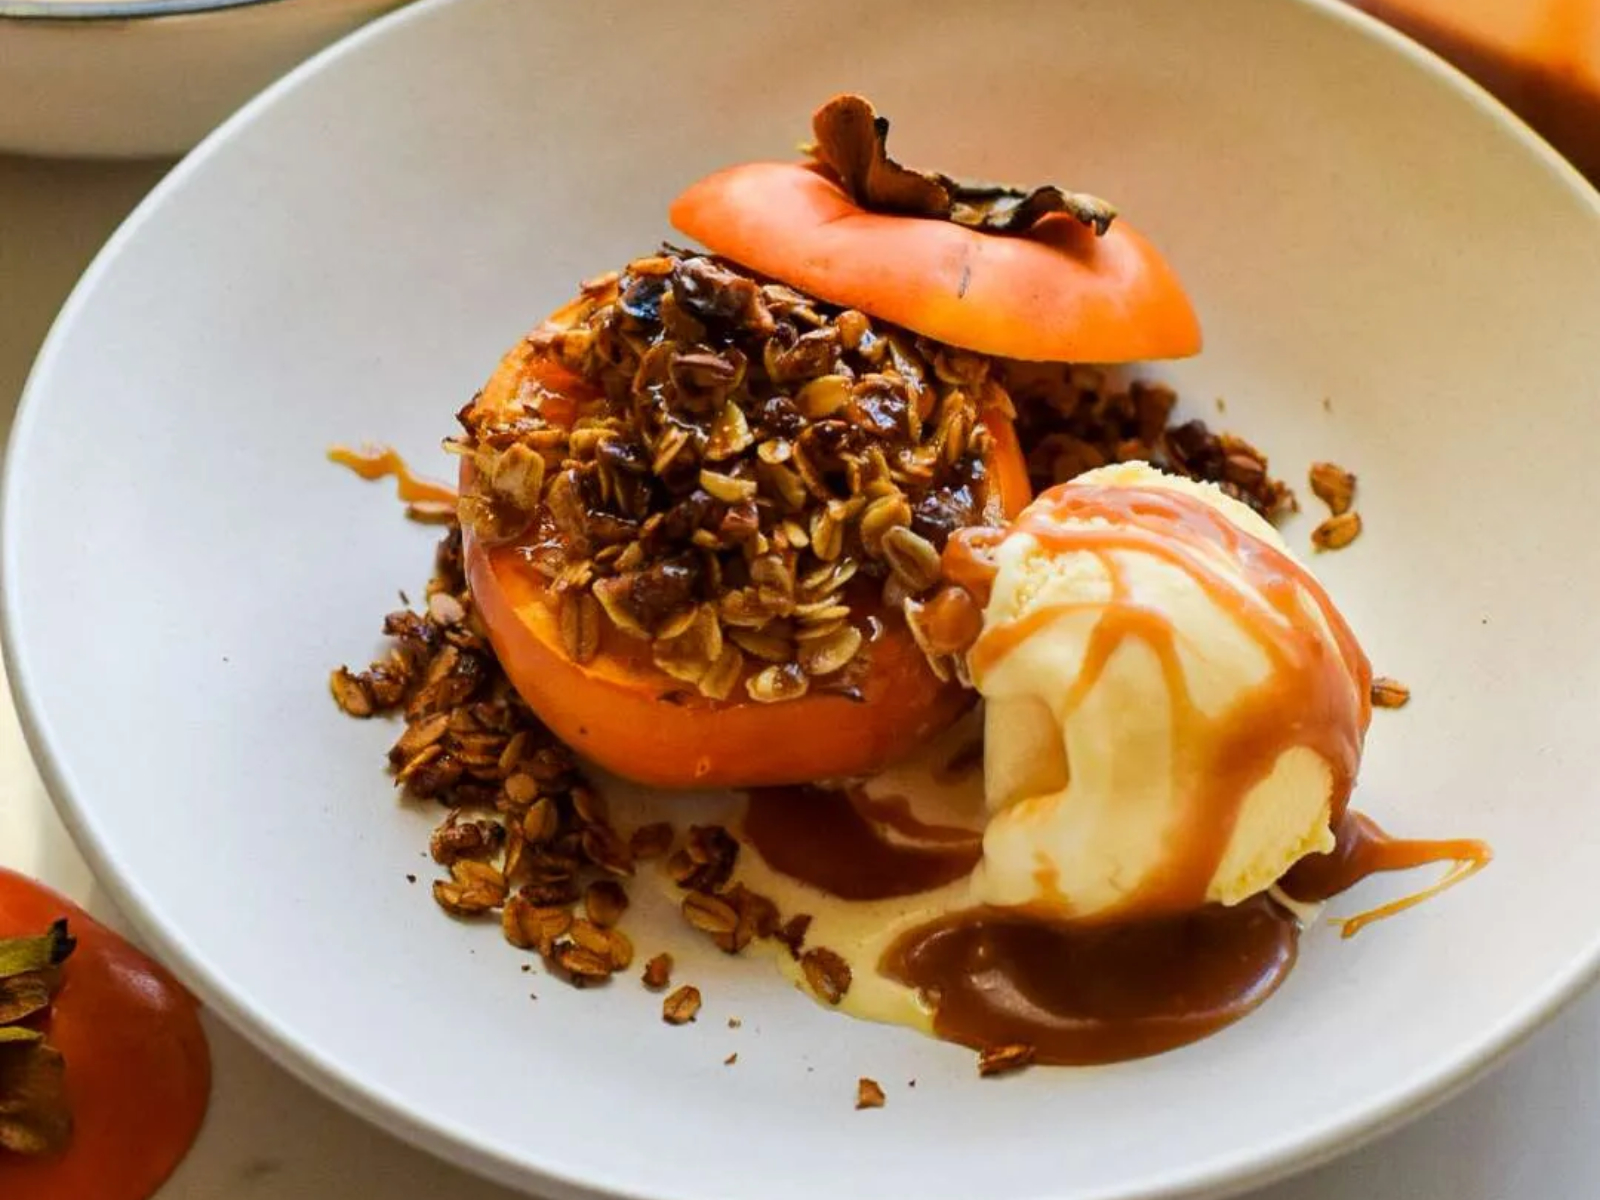 Baked Persimmon with Oat Crumble